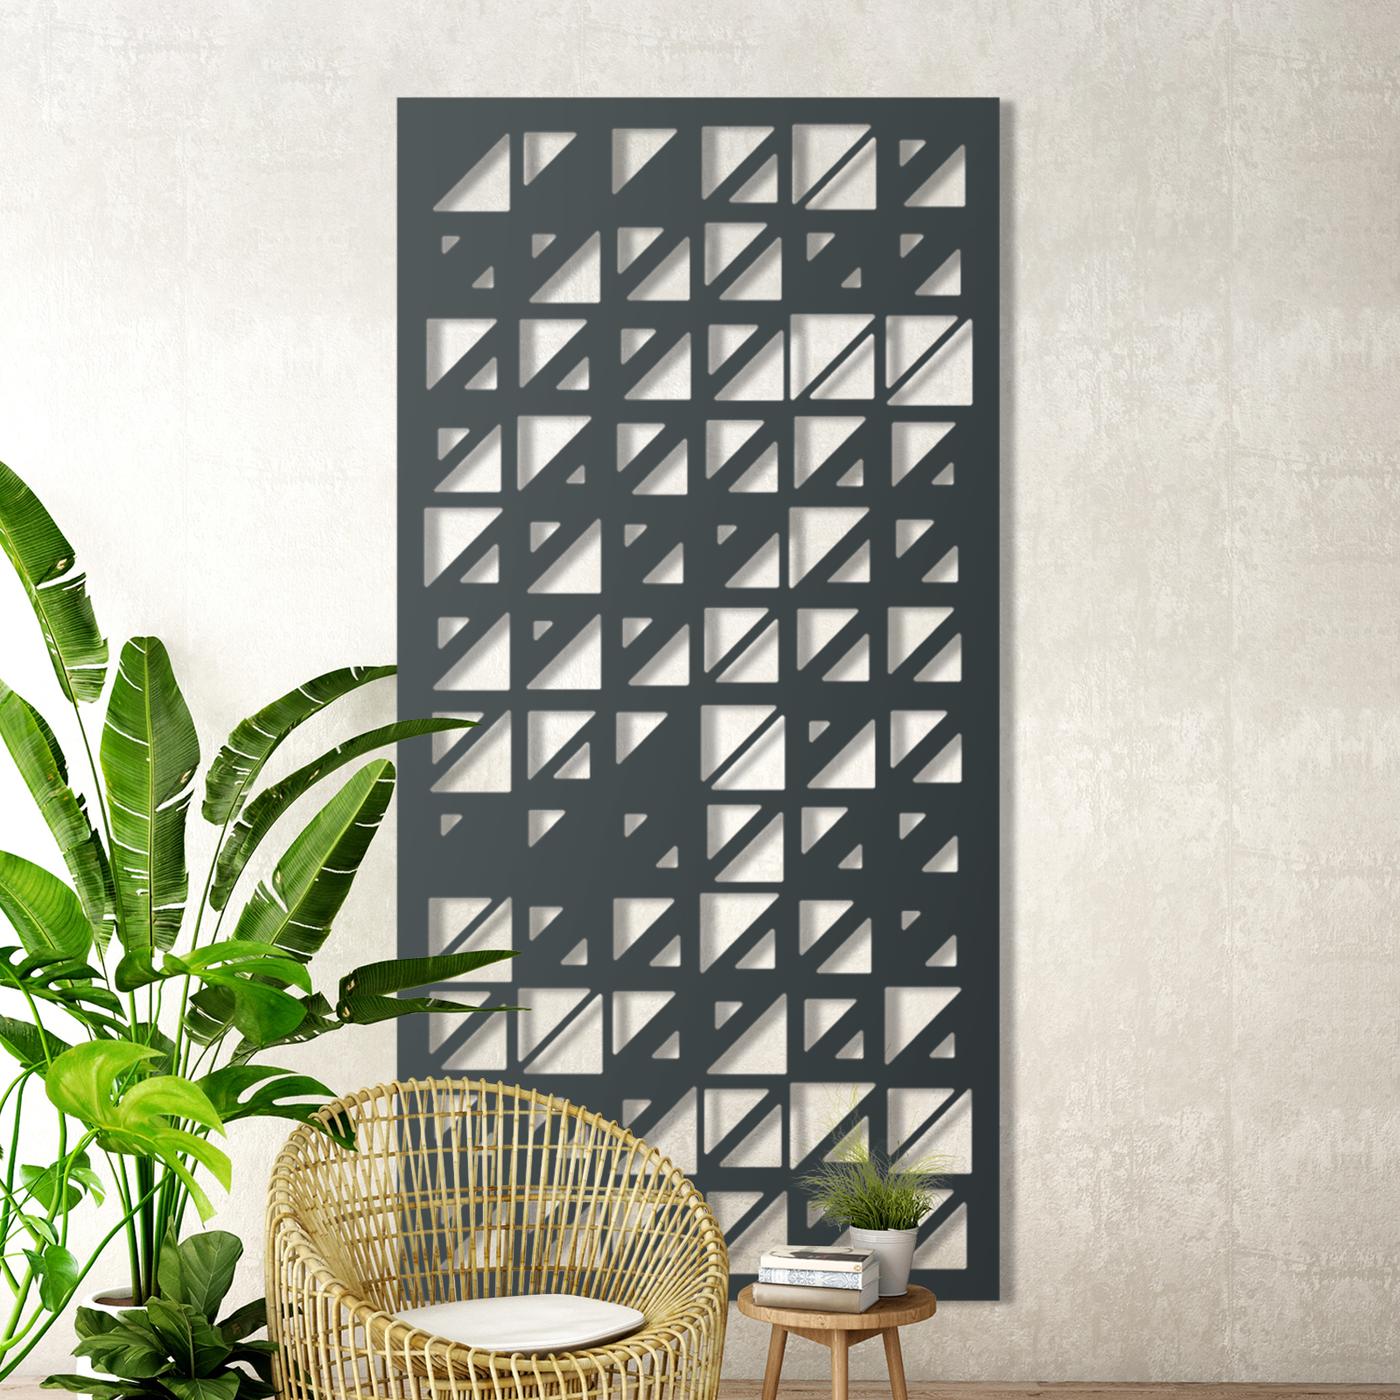 Mirror Mosaic Metal Garden Screen: Durable, Stylish, and Functional